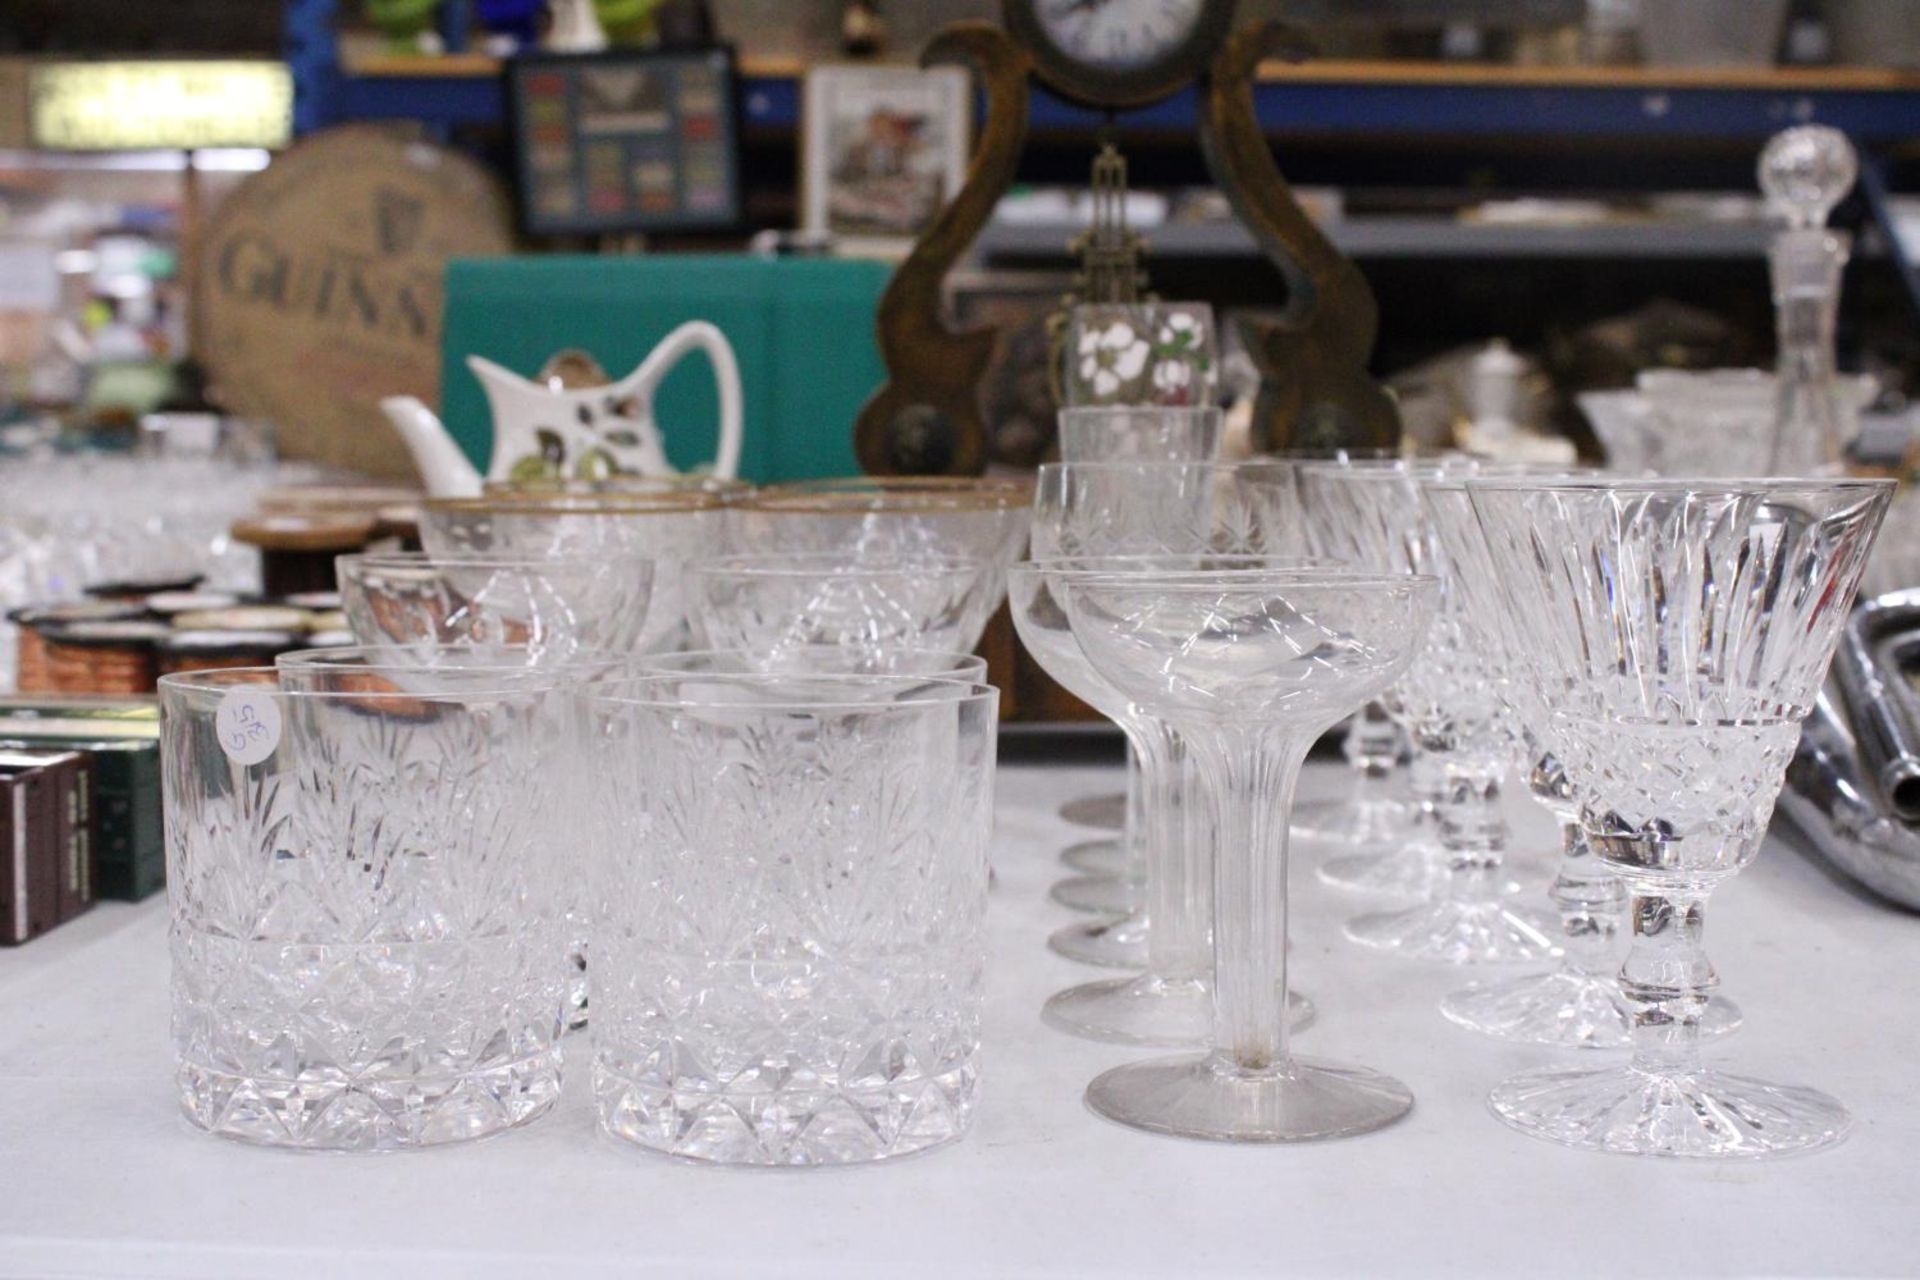 A COLLECTION OF GLASSWARE TO INCLUDE WINE GLASSES, COCKTAIL GLASSES, TUMBLERS ETC - Image 2 of 5